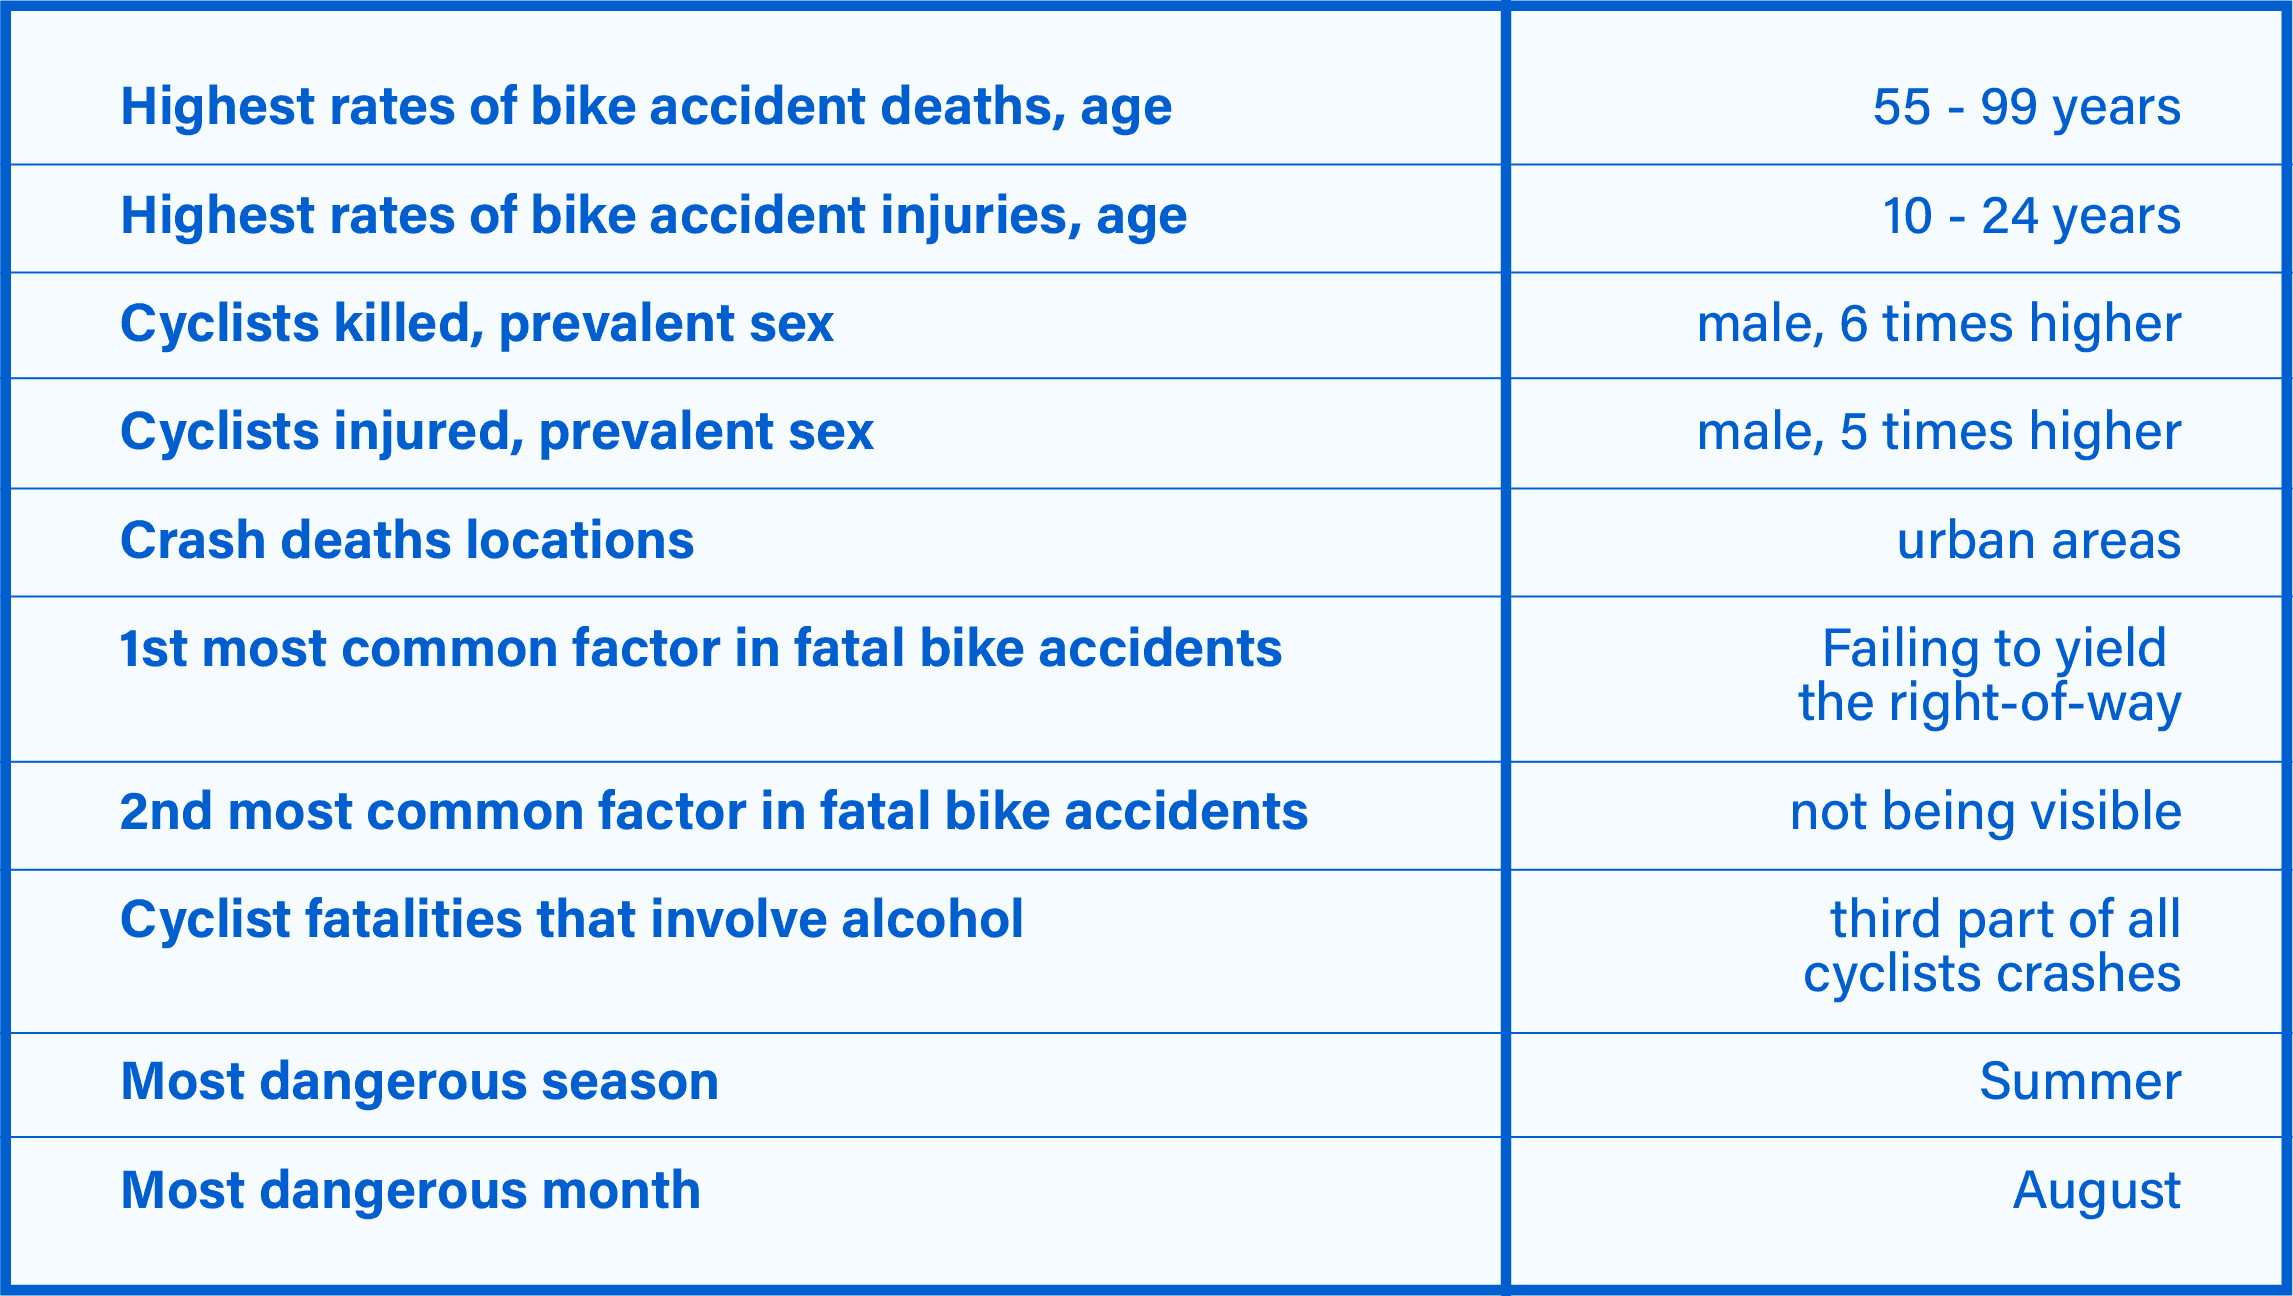 Who Is Injured and Killed in Bike Accidents